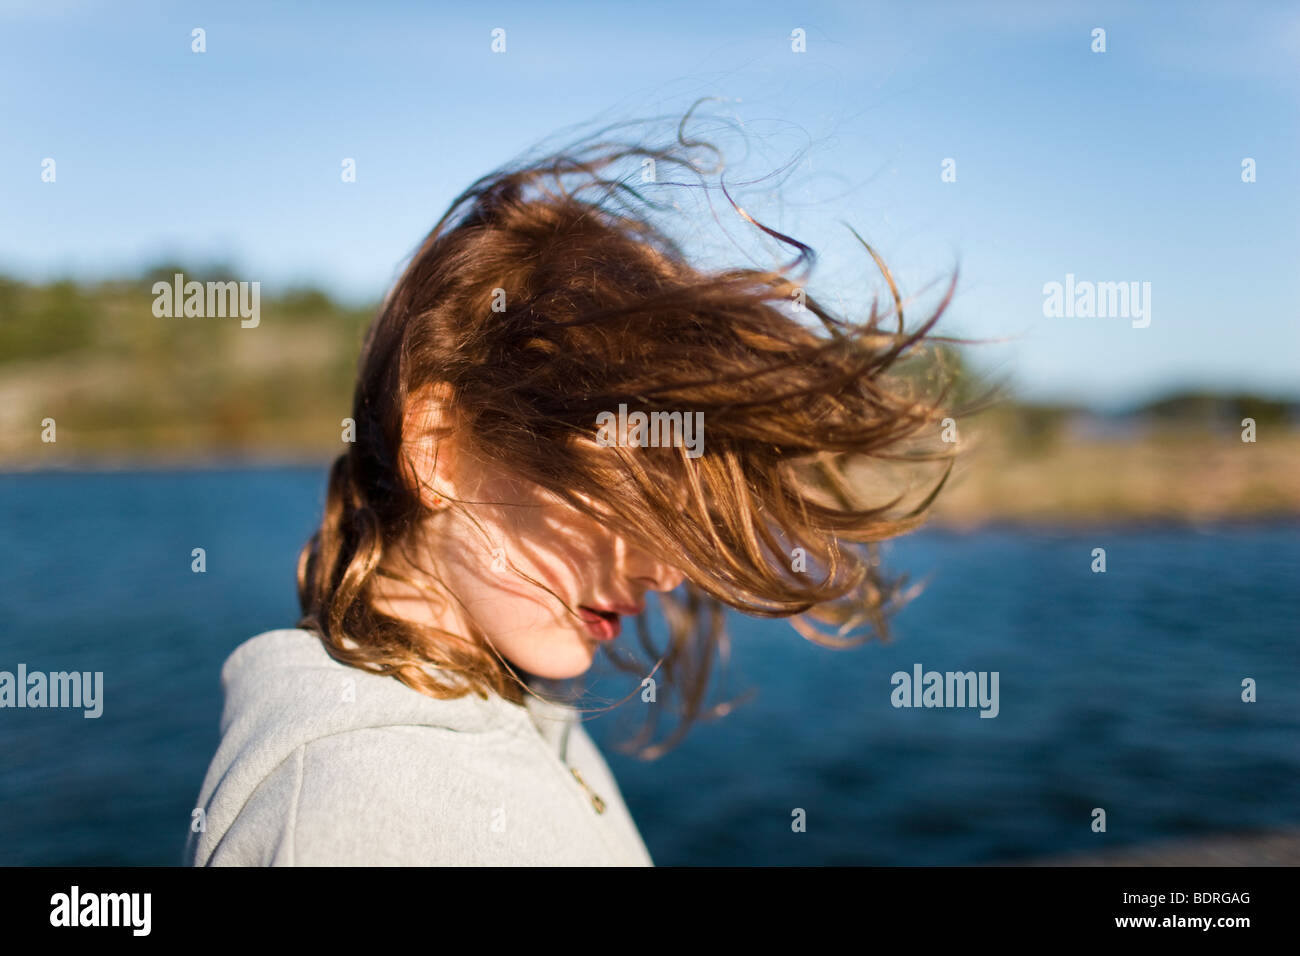 A girl with wind in her hair Stock Photo